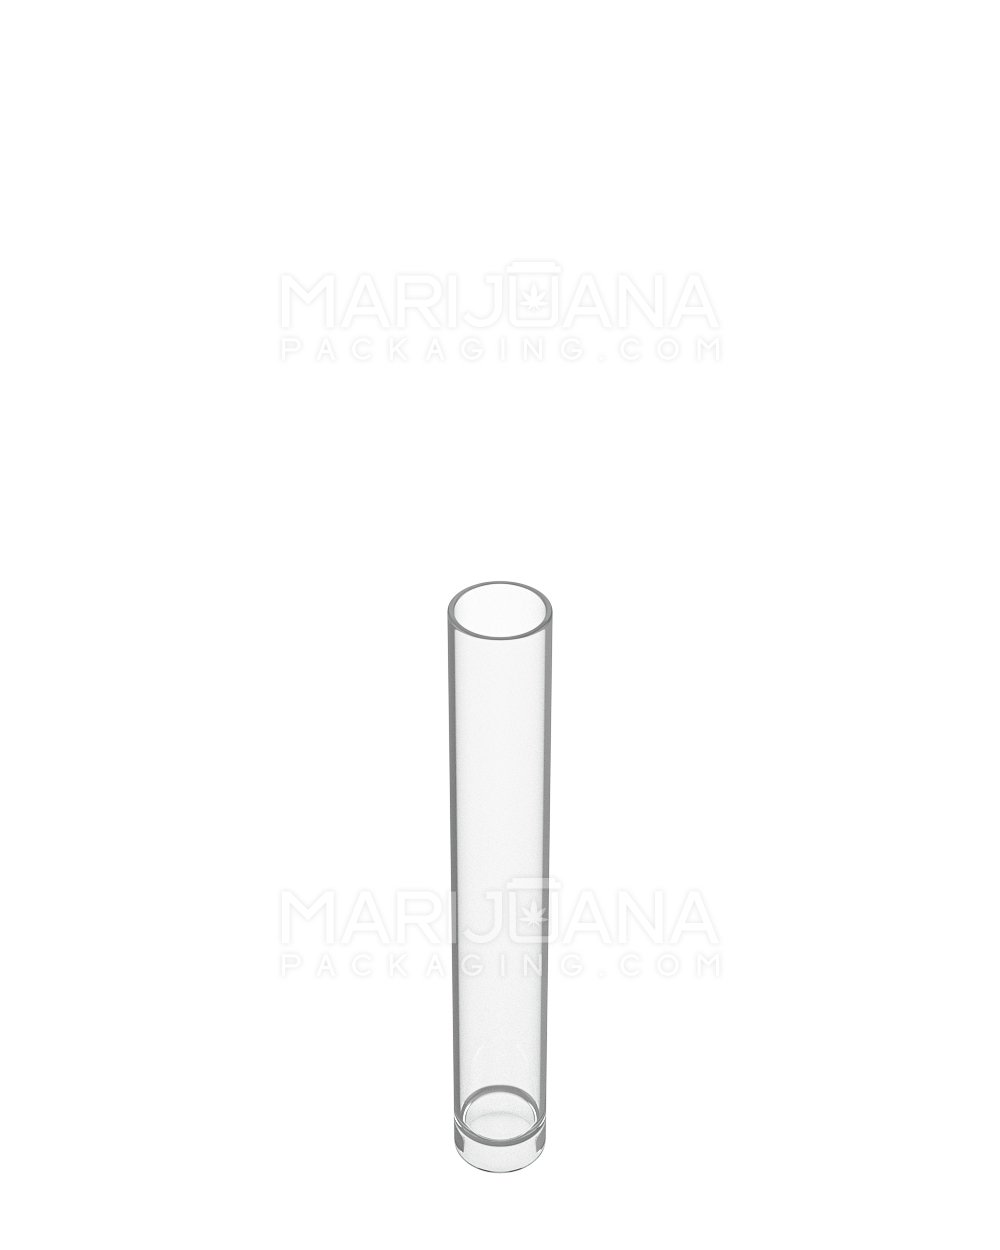 Buttonless Vape Cartridge Tube w/ White Cap | 86mm - Clear Plastic - 500 Count - 3